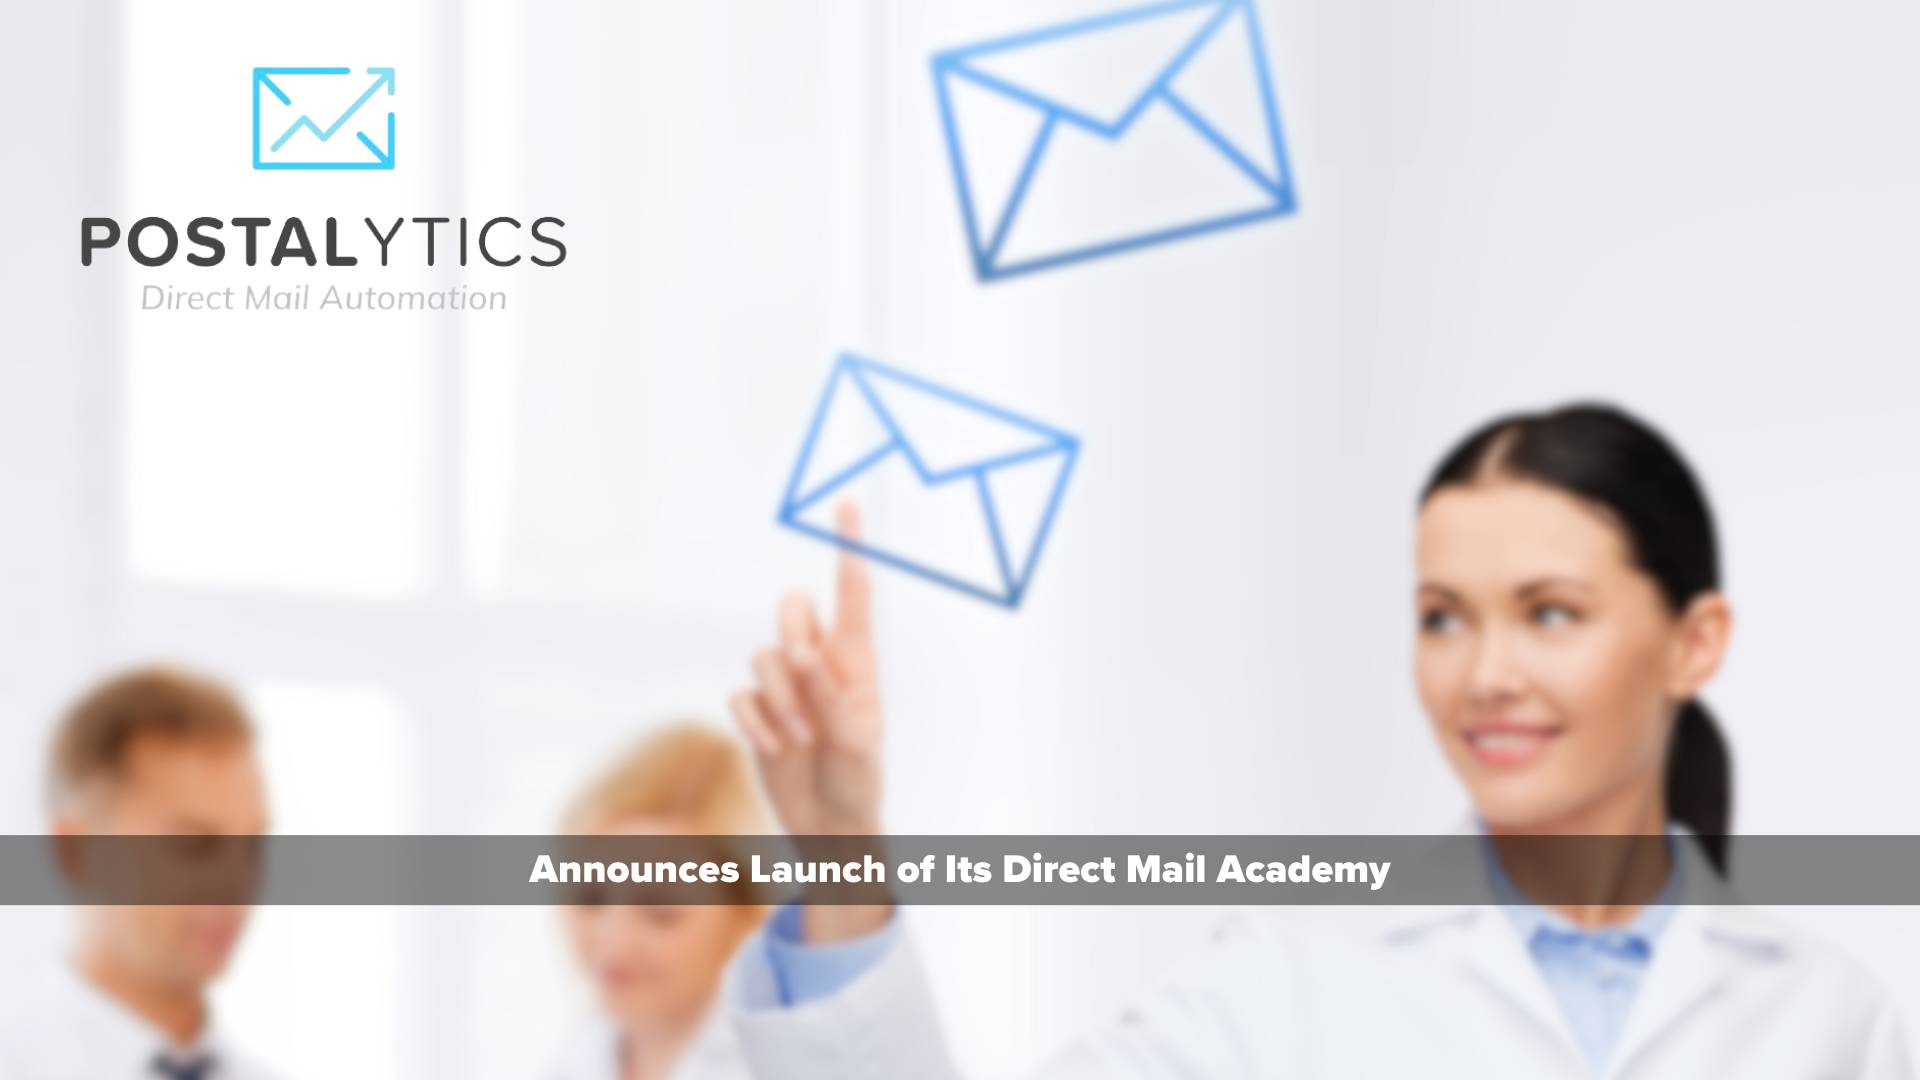 Postalytics Announces Launch of Its Direct Mail Academy